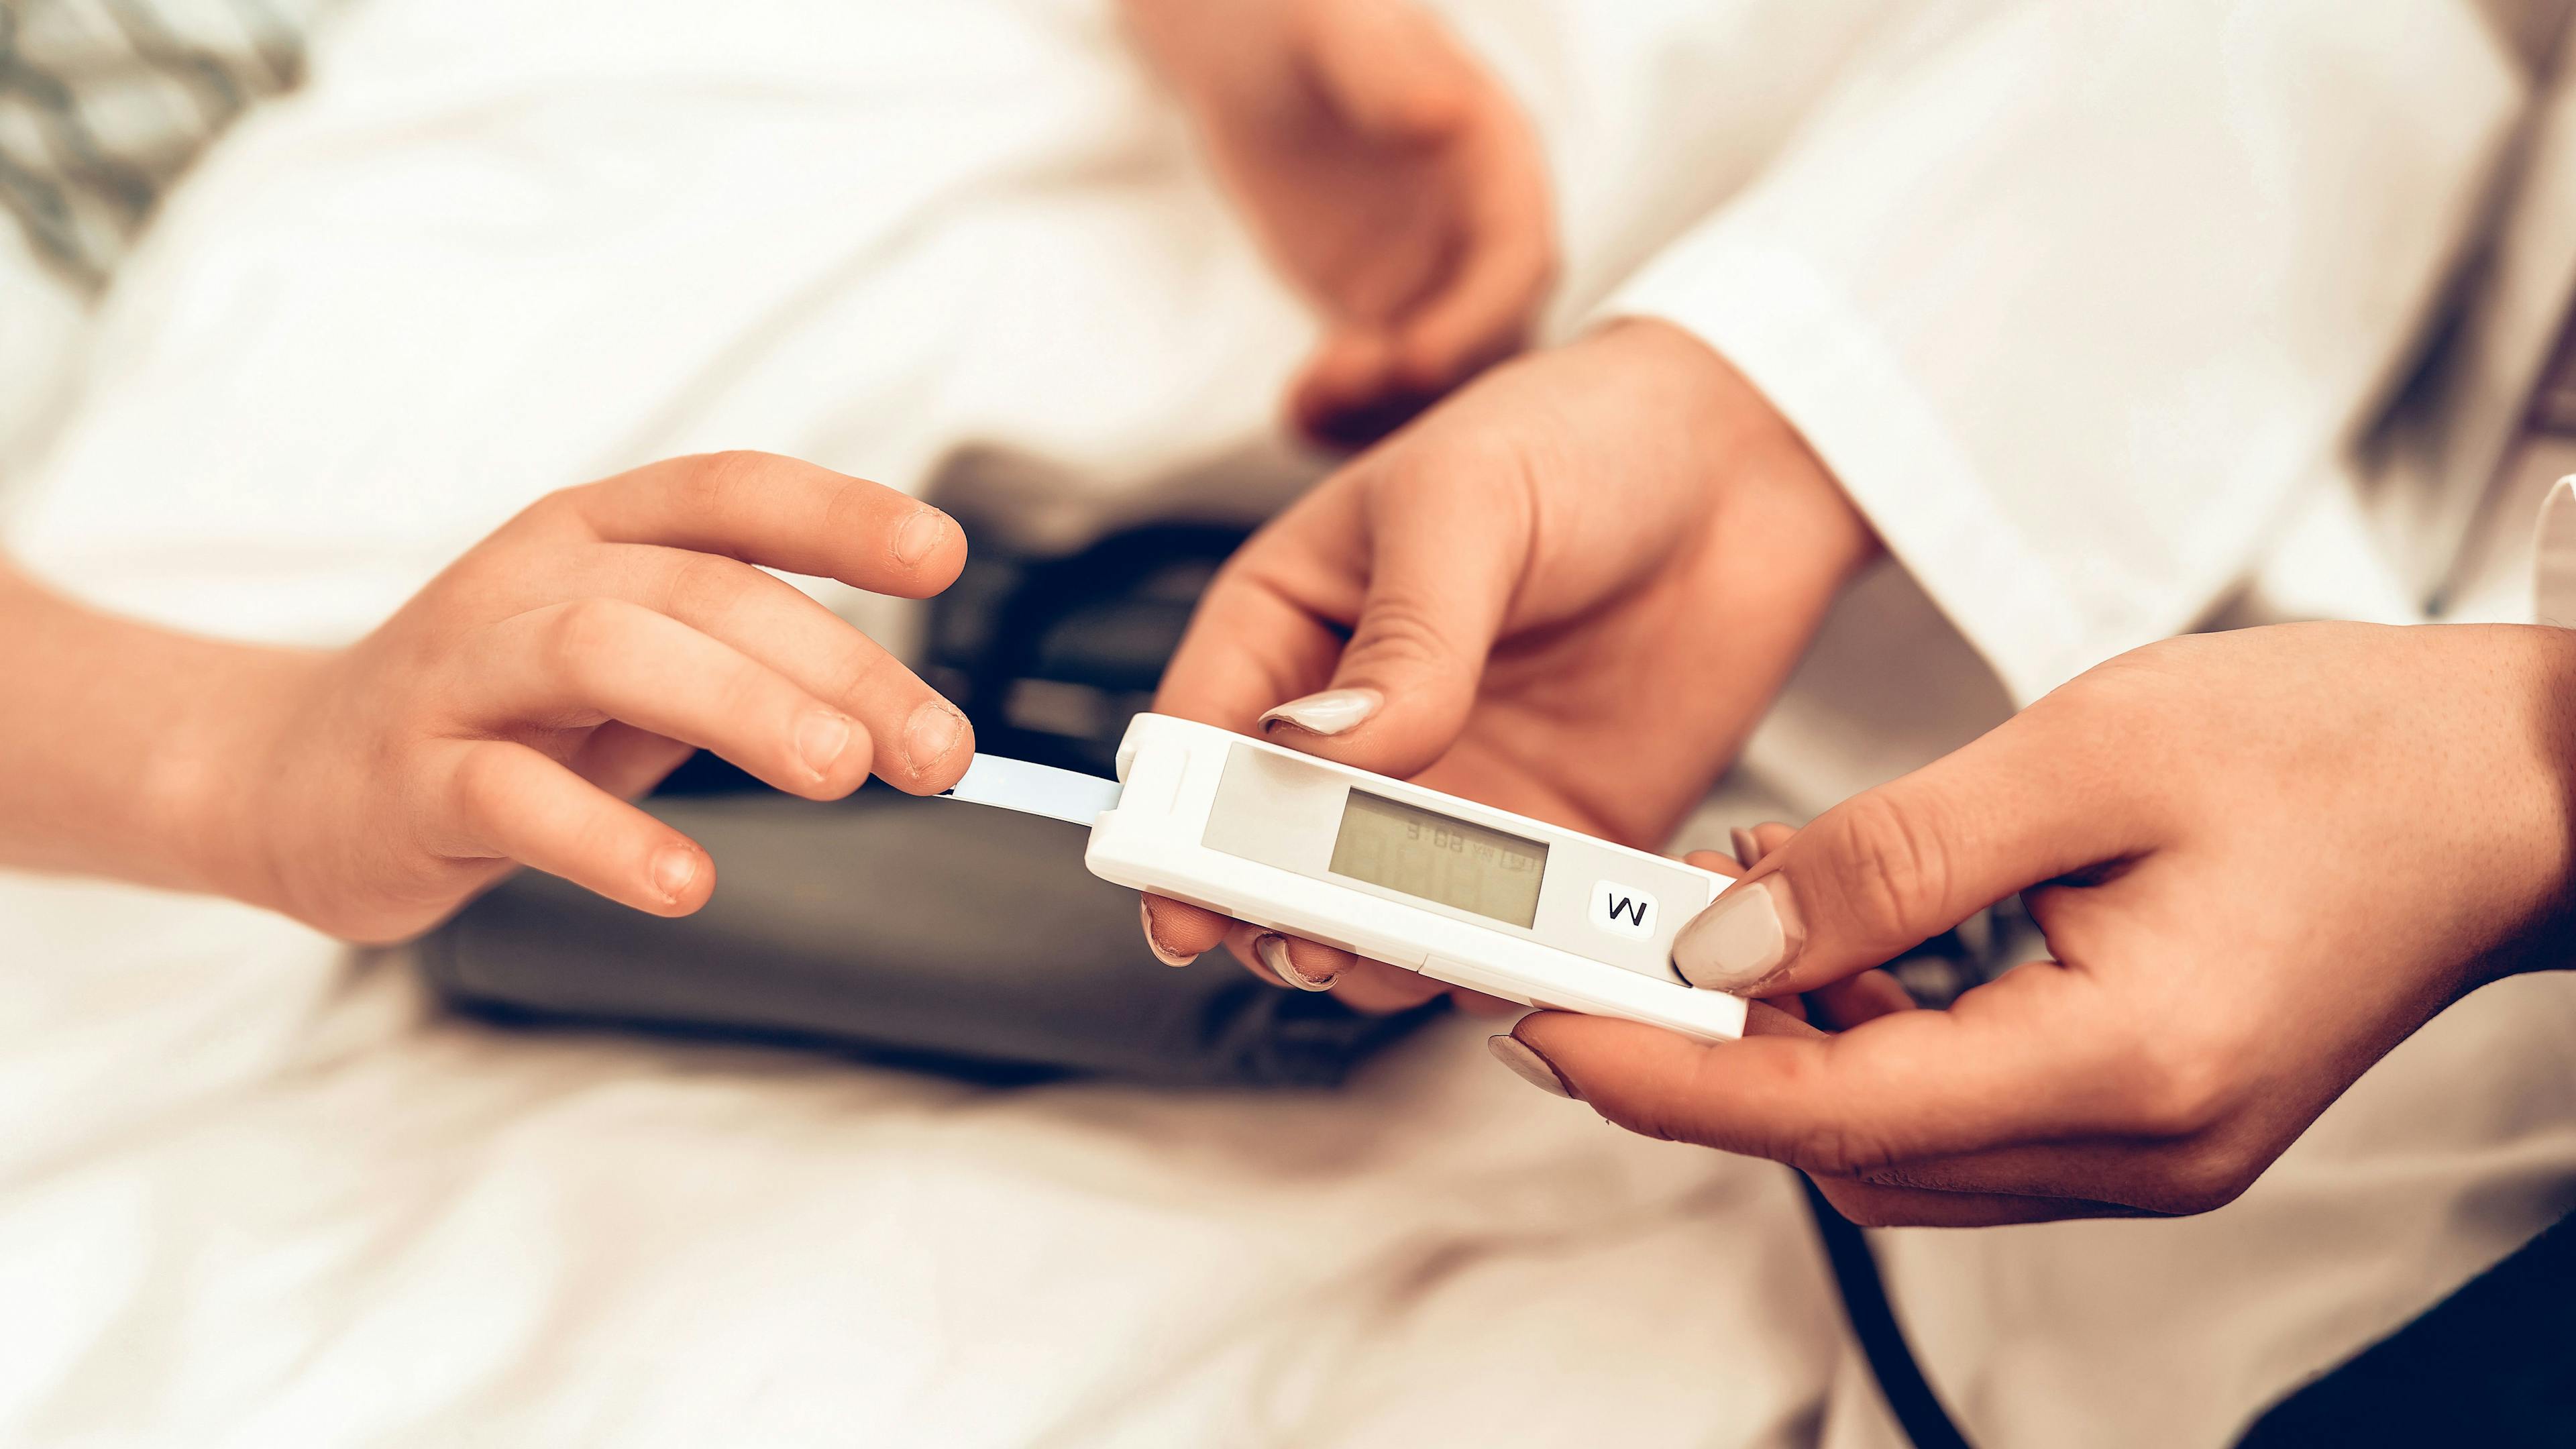 Young Children in Medicaid have More Diabetes Complications